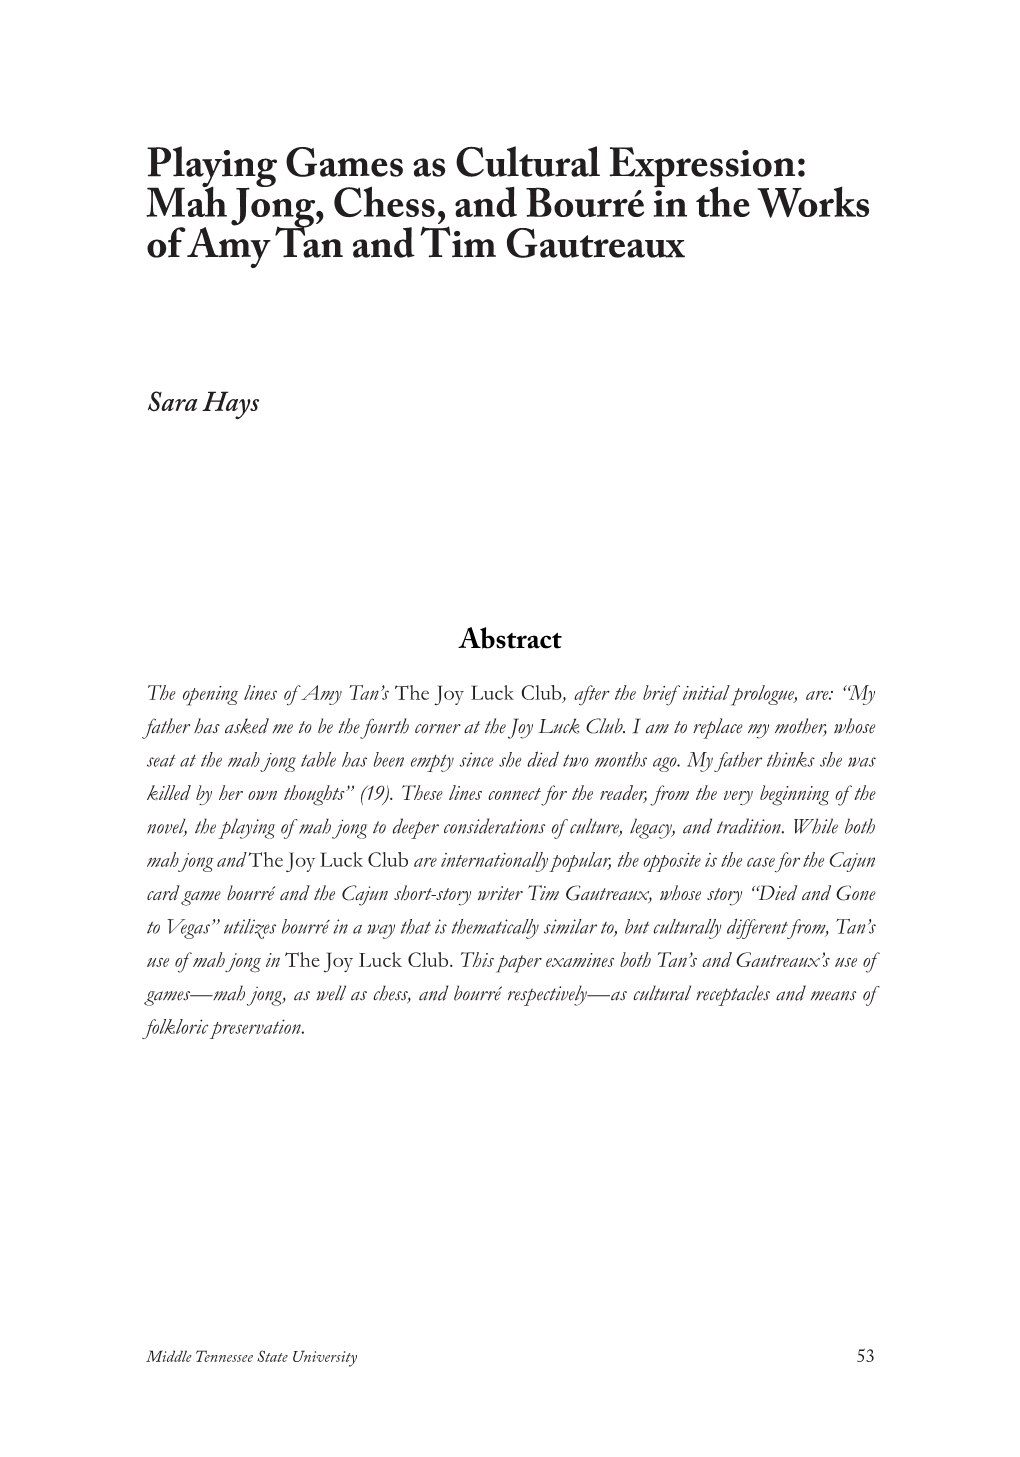 Mah Jong, Chess, and Bourré in the Works of Amy Tan and Tim Gautreaux